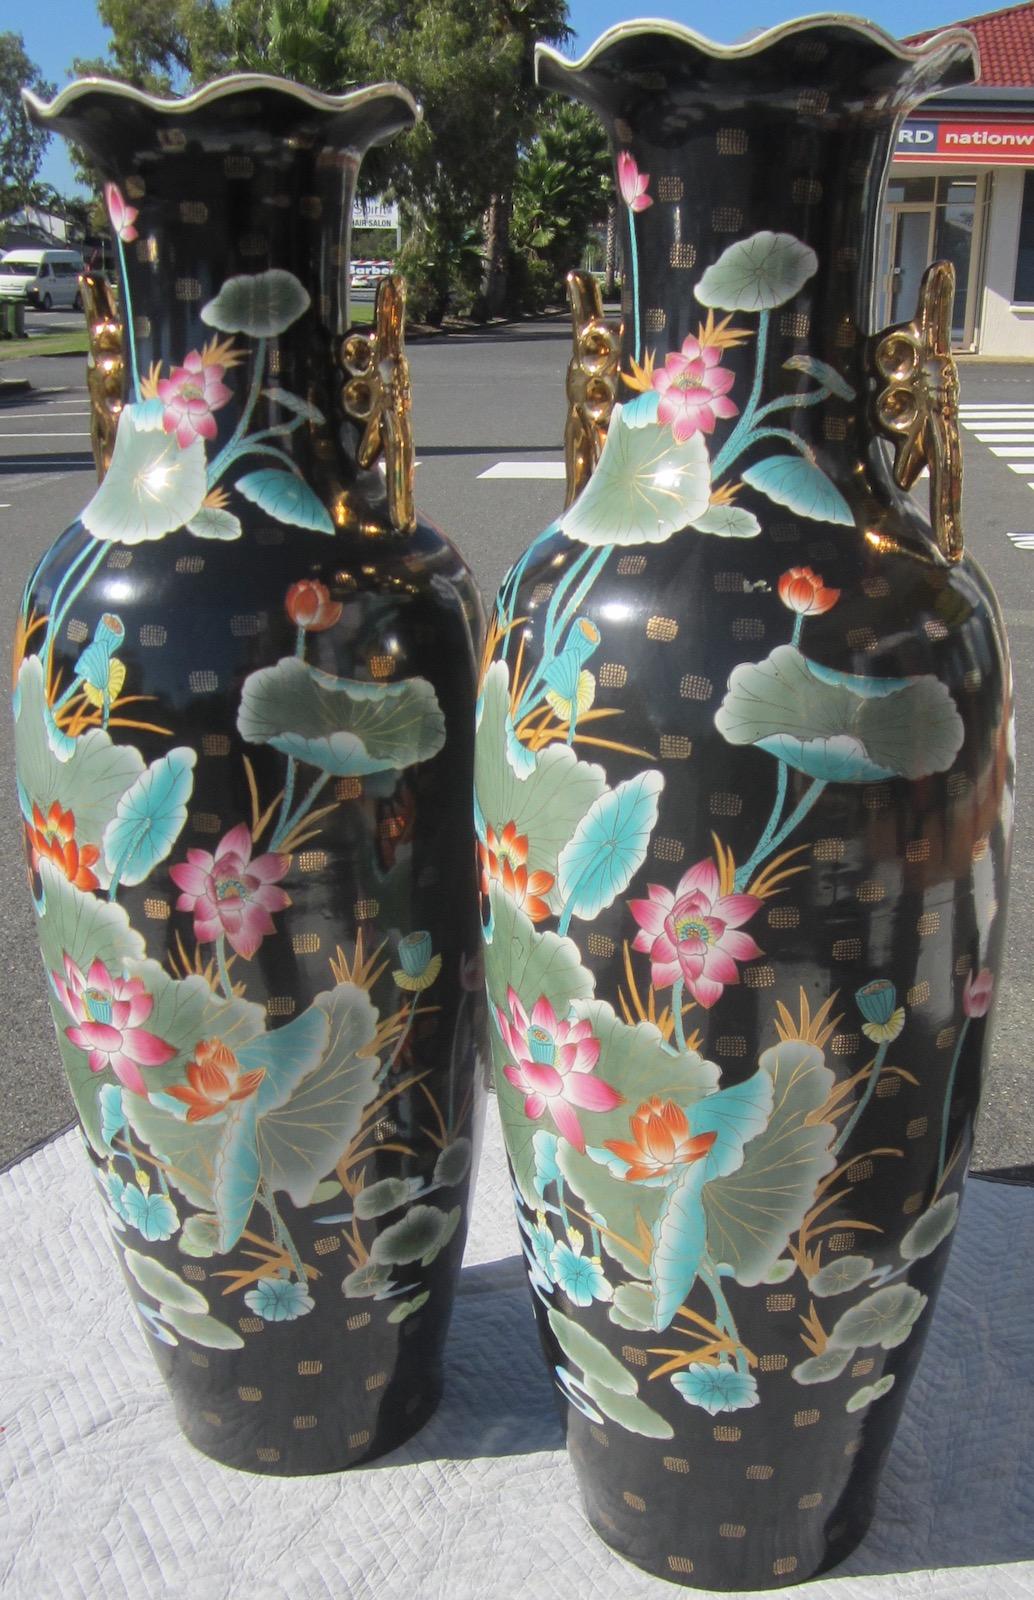 Pair of Chinese large ceramic floor vases / temple vases,
noir lotus flower decoration with gold plating,
no markings on bases,
weight 35kg each.
Our eclectic stock crosses cultures, continents, styles and famous names.
 